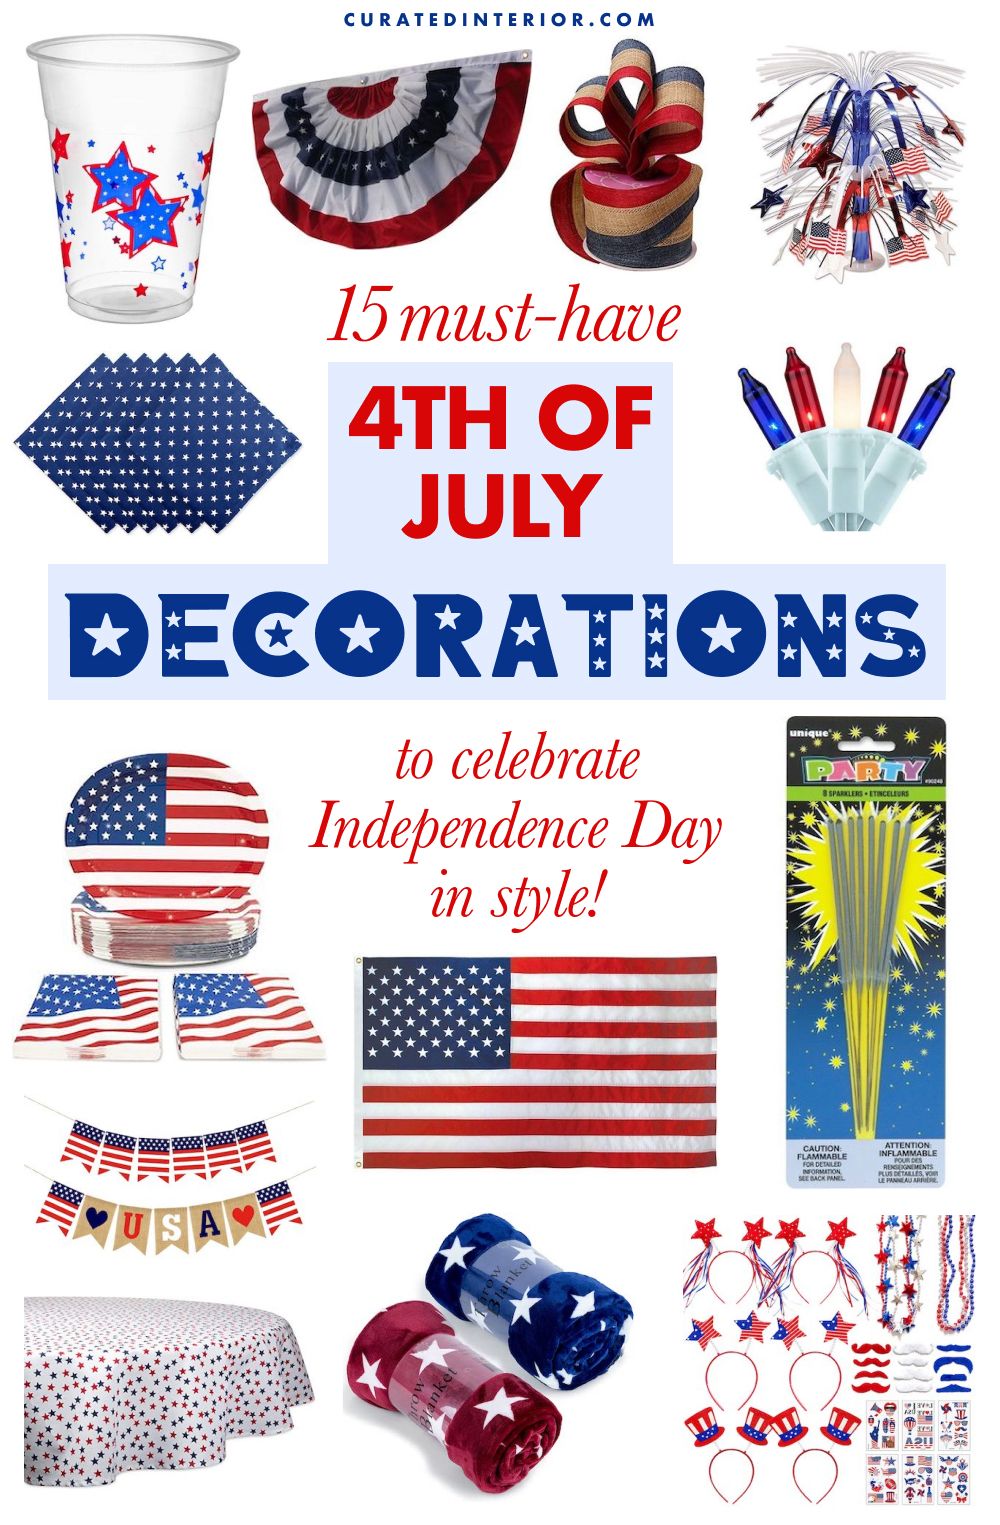 CASEKEY 4th of July Decorations Paper Fans,Fourth of July Decorations Outdoor,Independence Day,Patriotic National Day Decor Supplies Red White Blue Hanging Swirls Party Decor Supplies,12PCS 